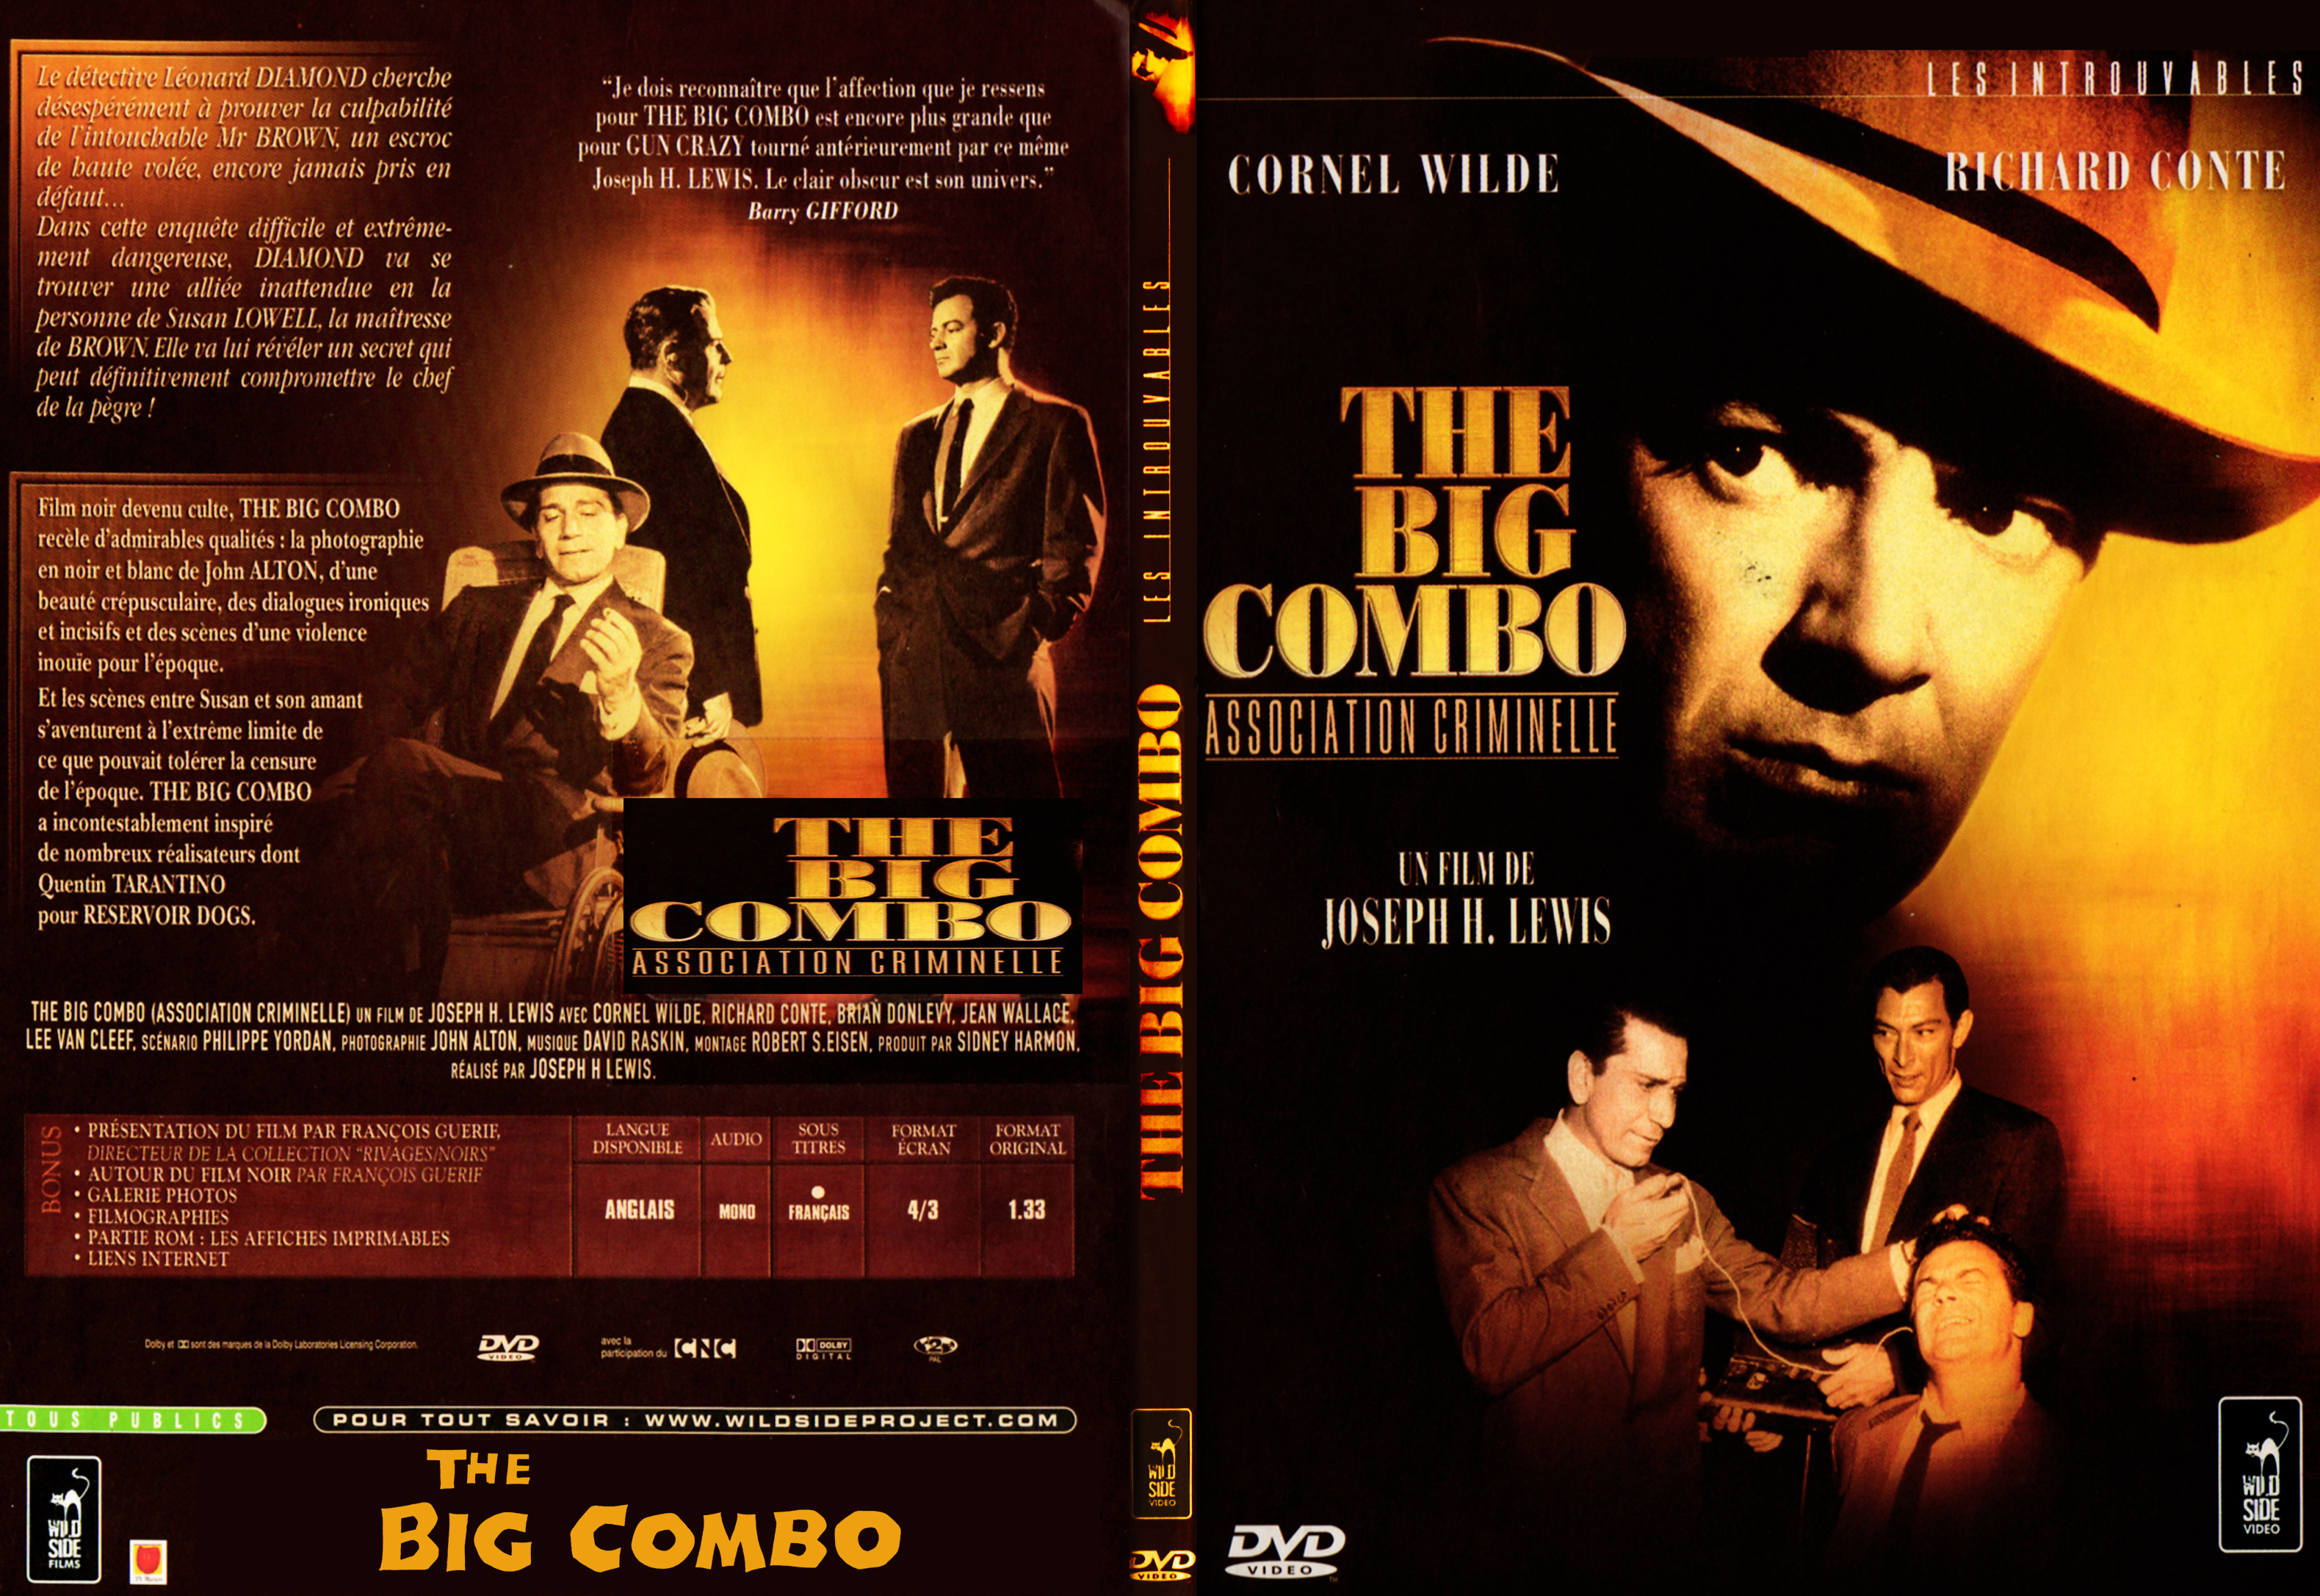 Jaquette DVD The big combo